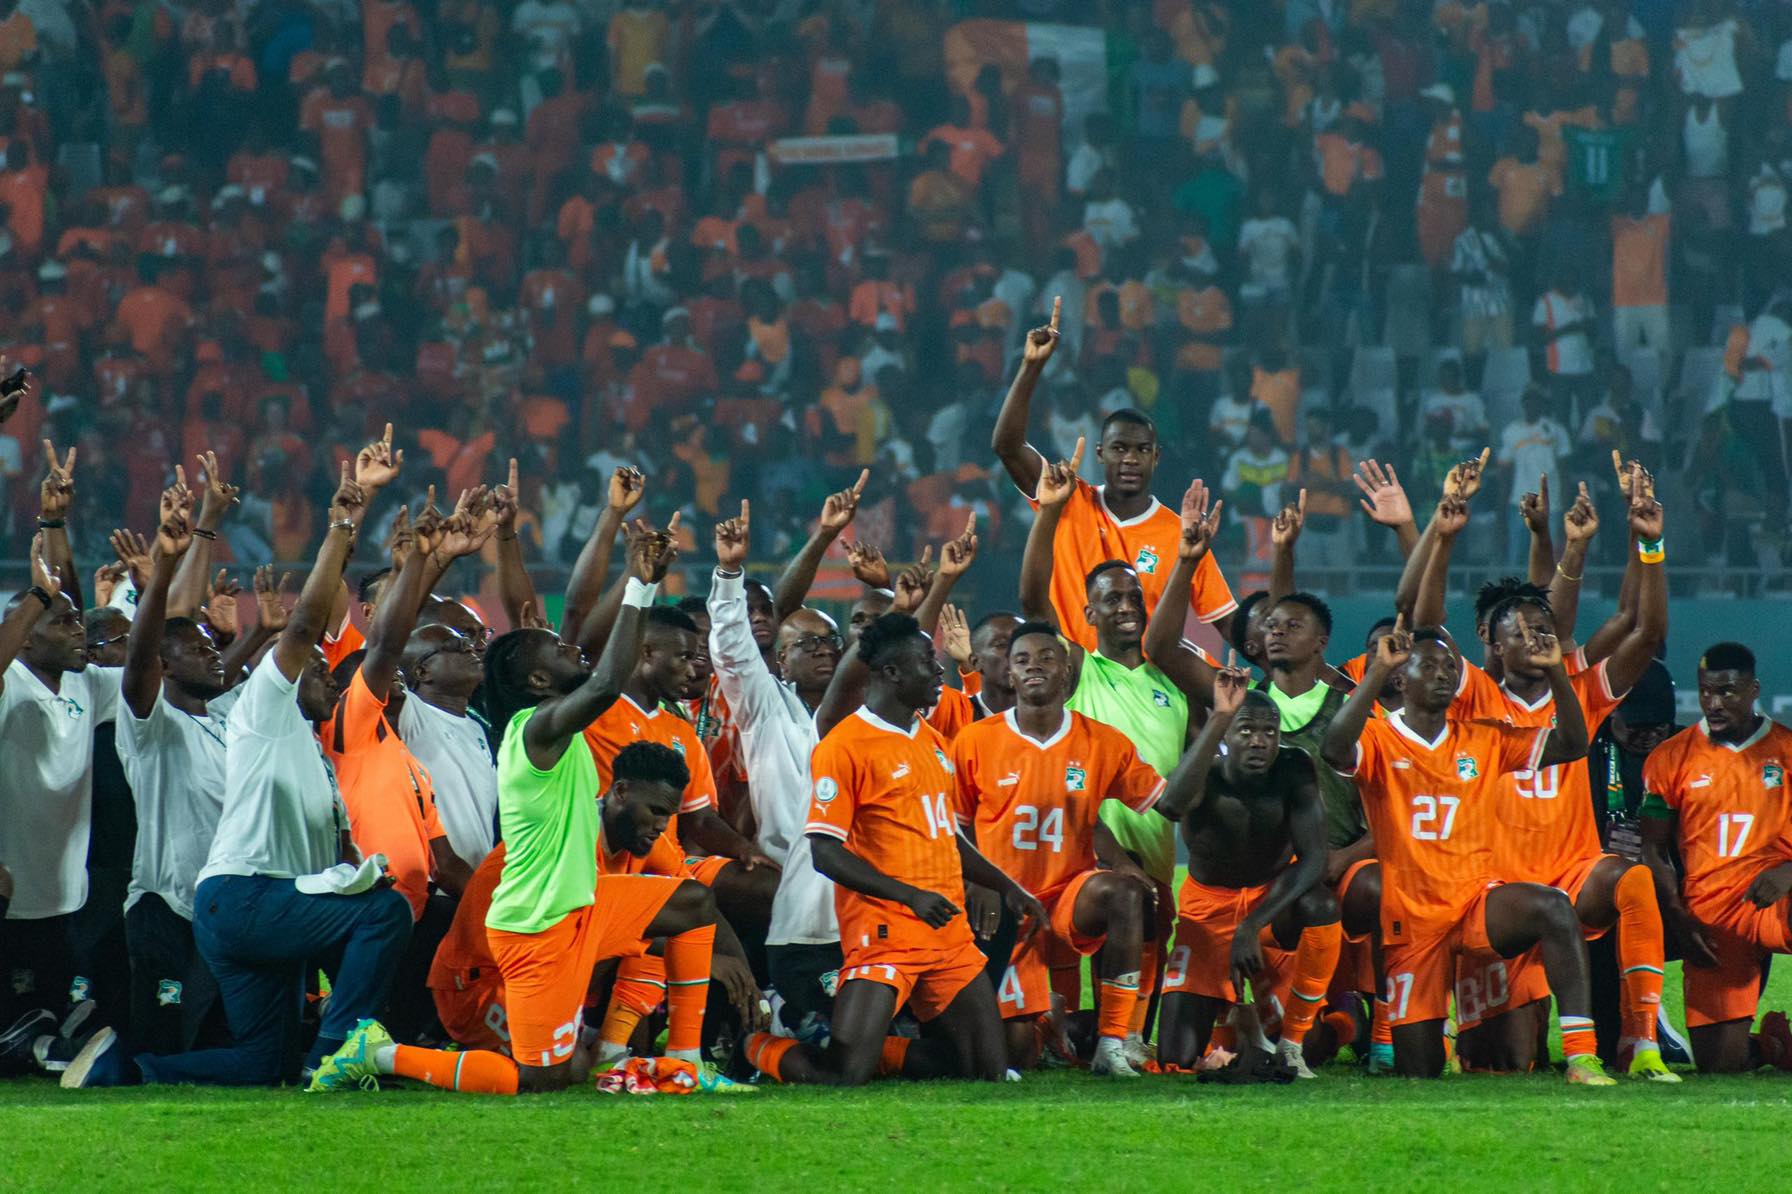 Almost Eliminated from AFCON: Here’s the Miraculous Journey of Côte d'Ivoire’s Elephants